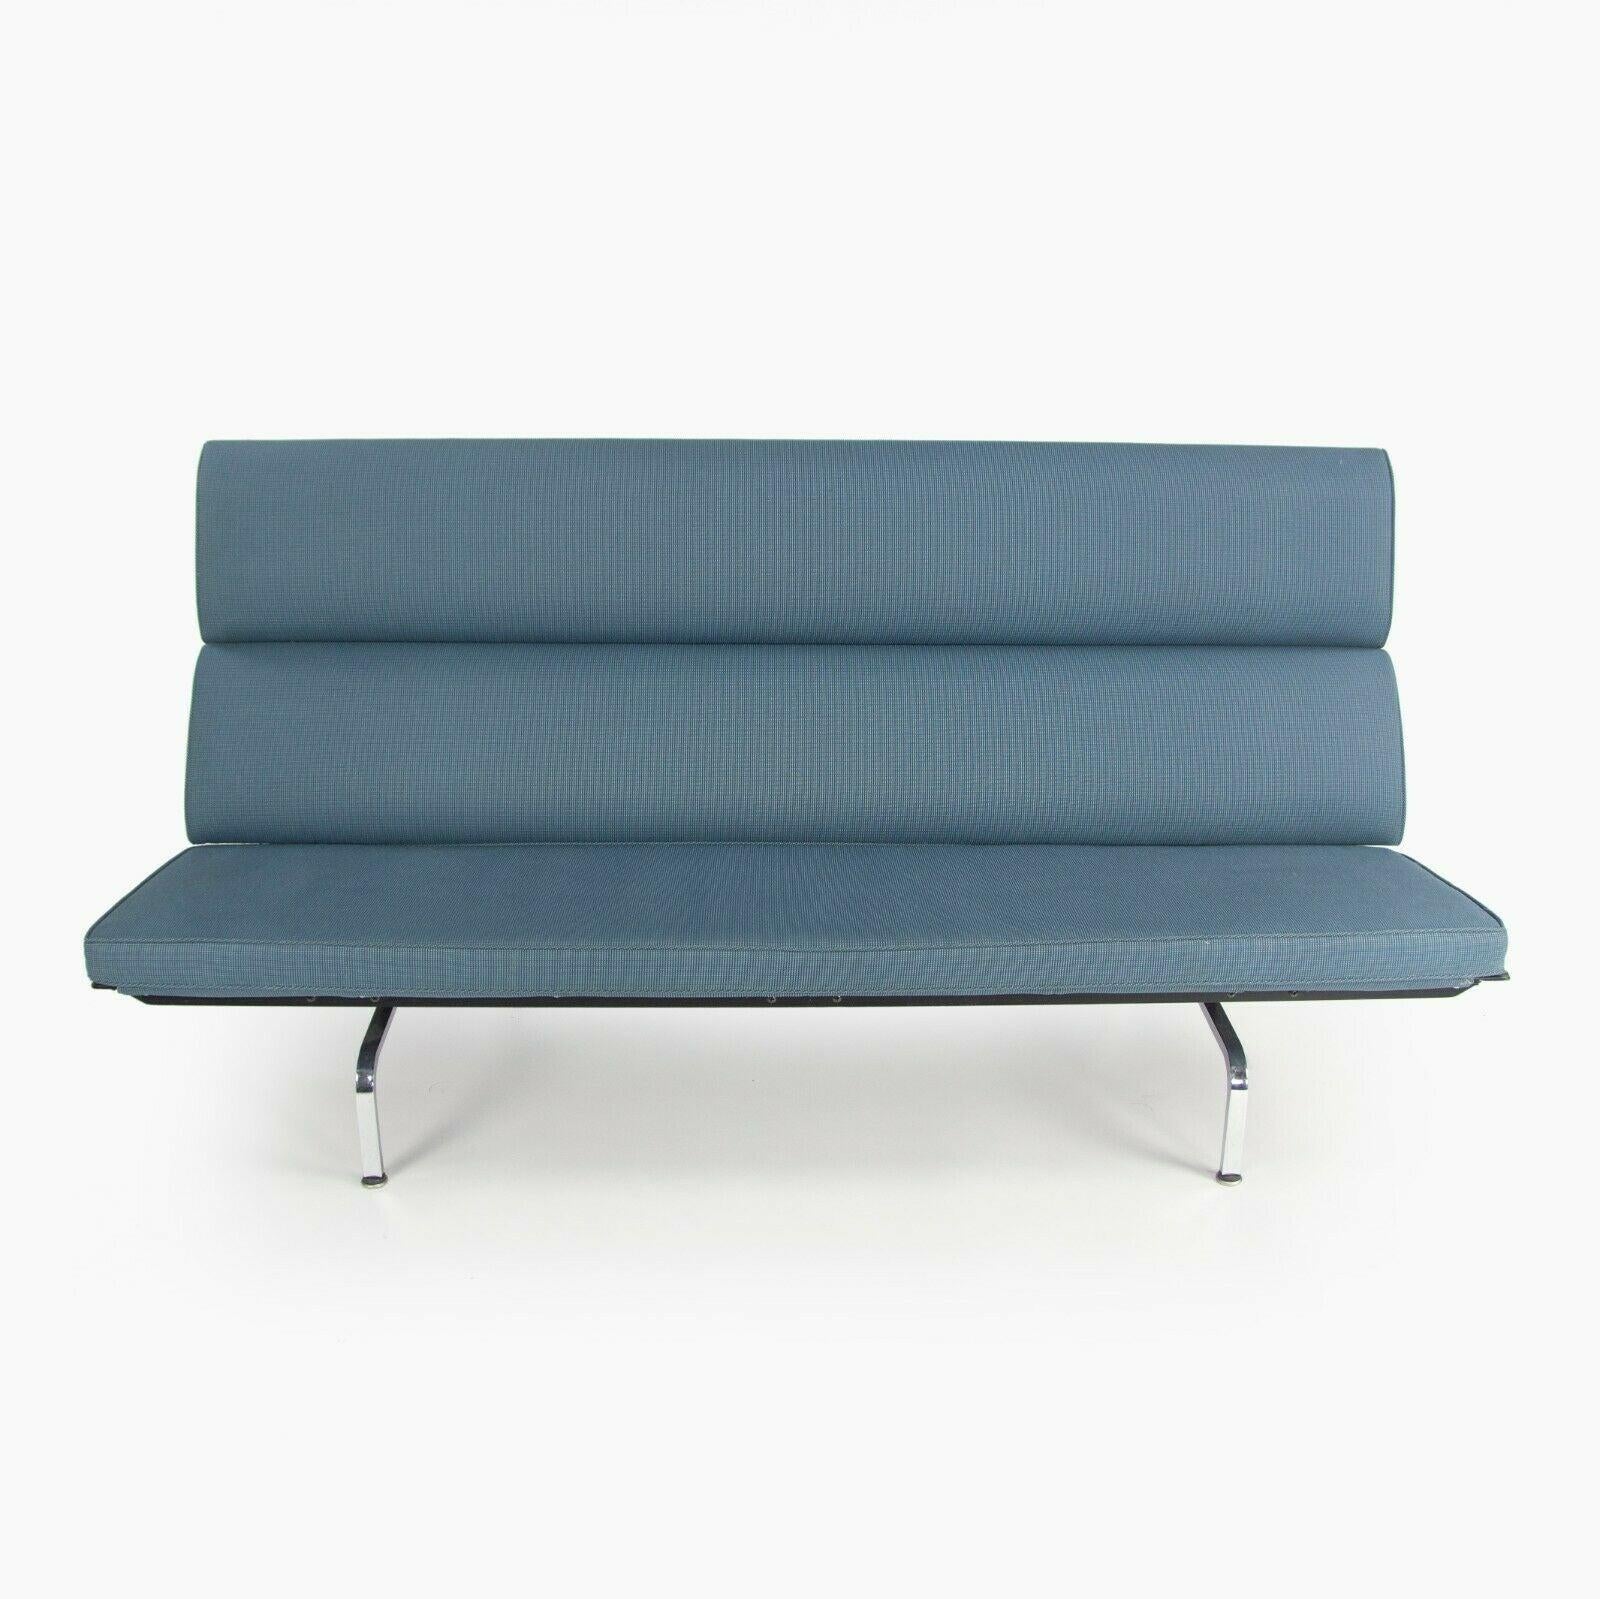 2006 Herman Miller by Ray and Charles Eames Sofa Compact Blue Fabric Upholstery In Good Condition For Sale In Philadelphia, PA